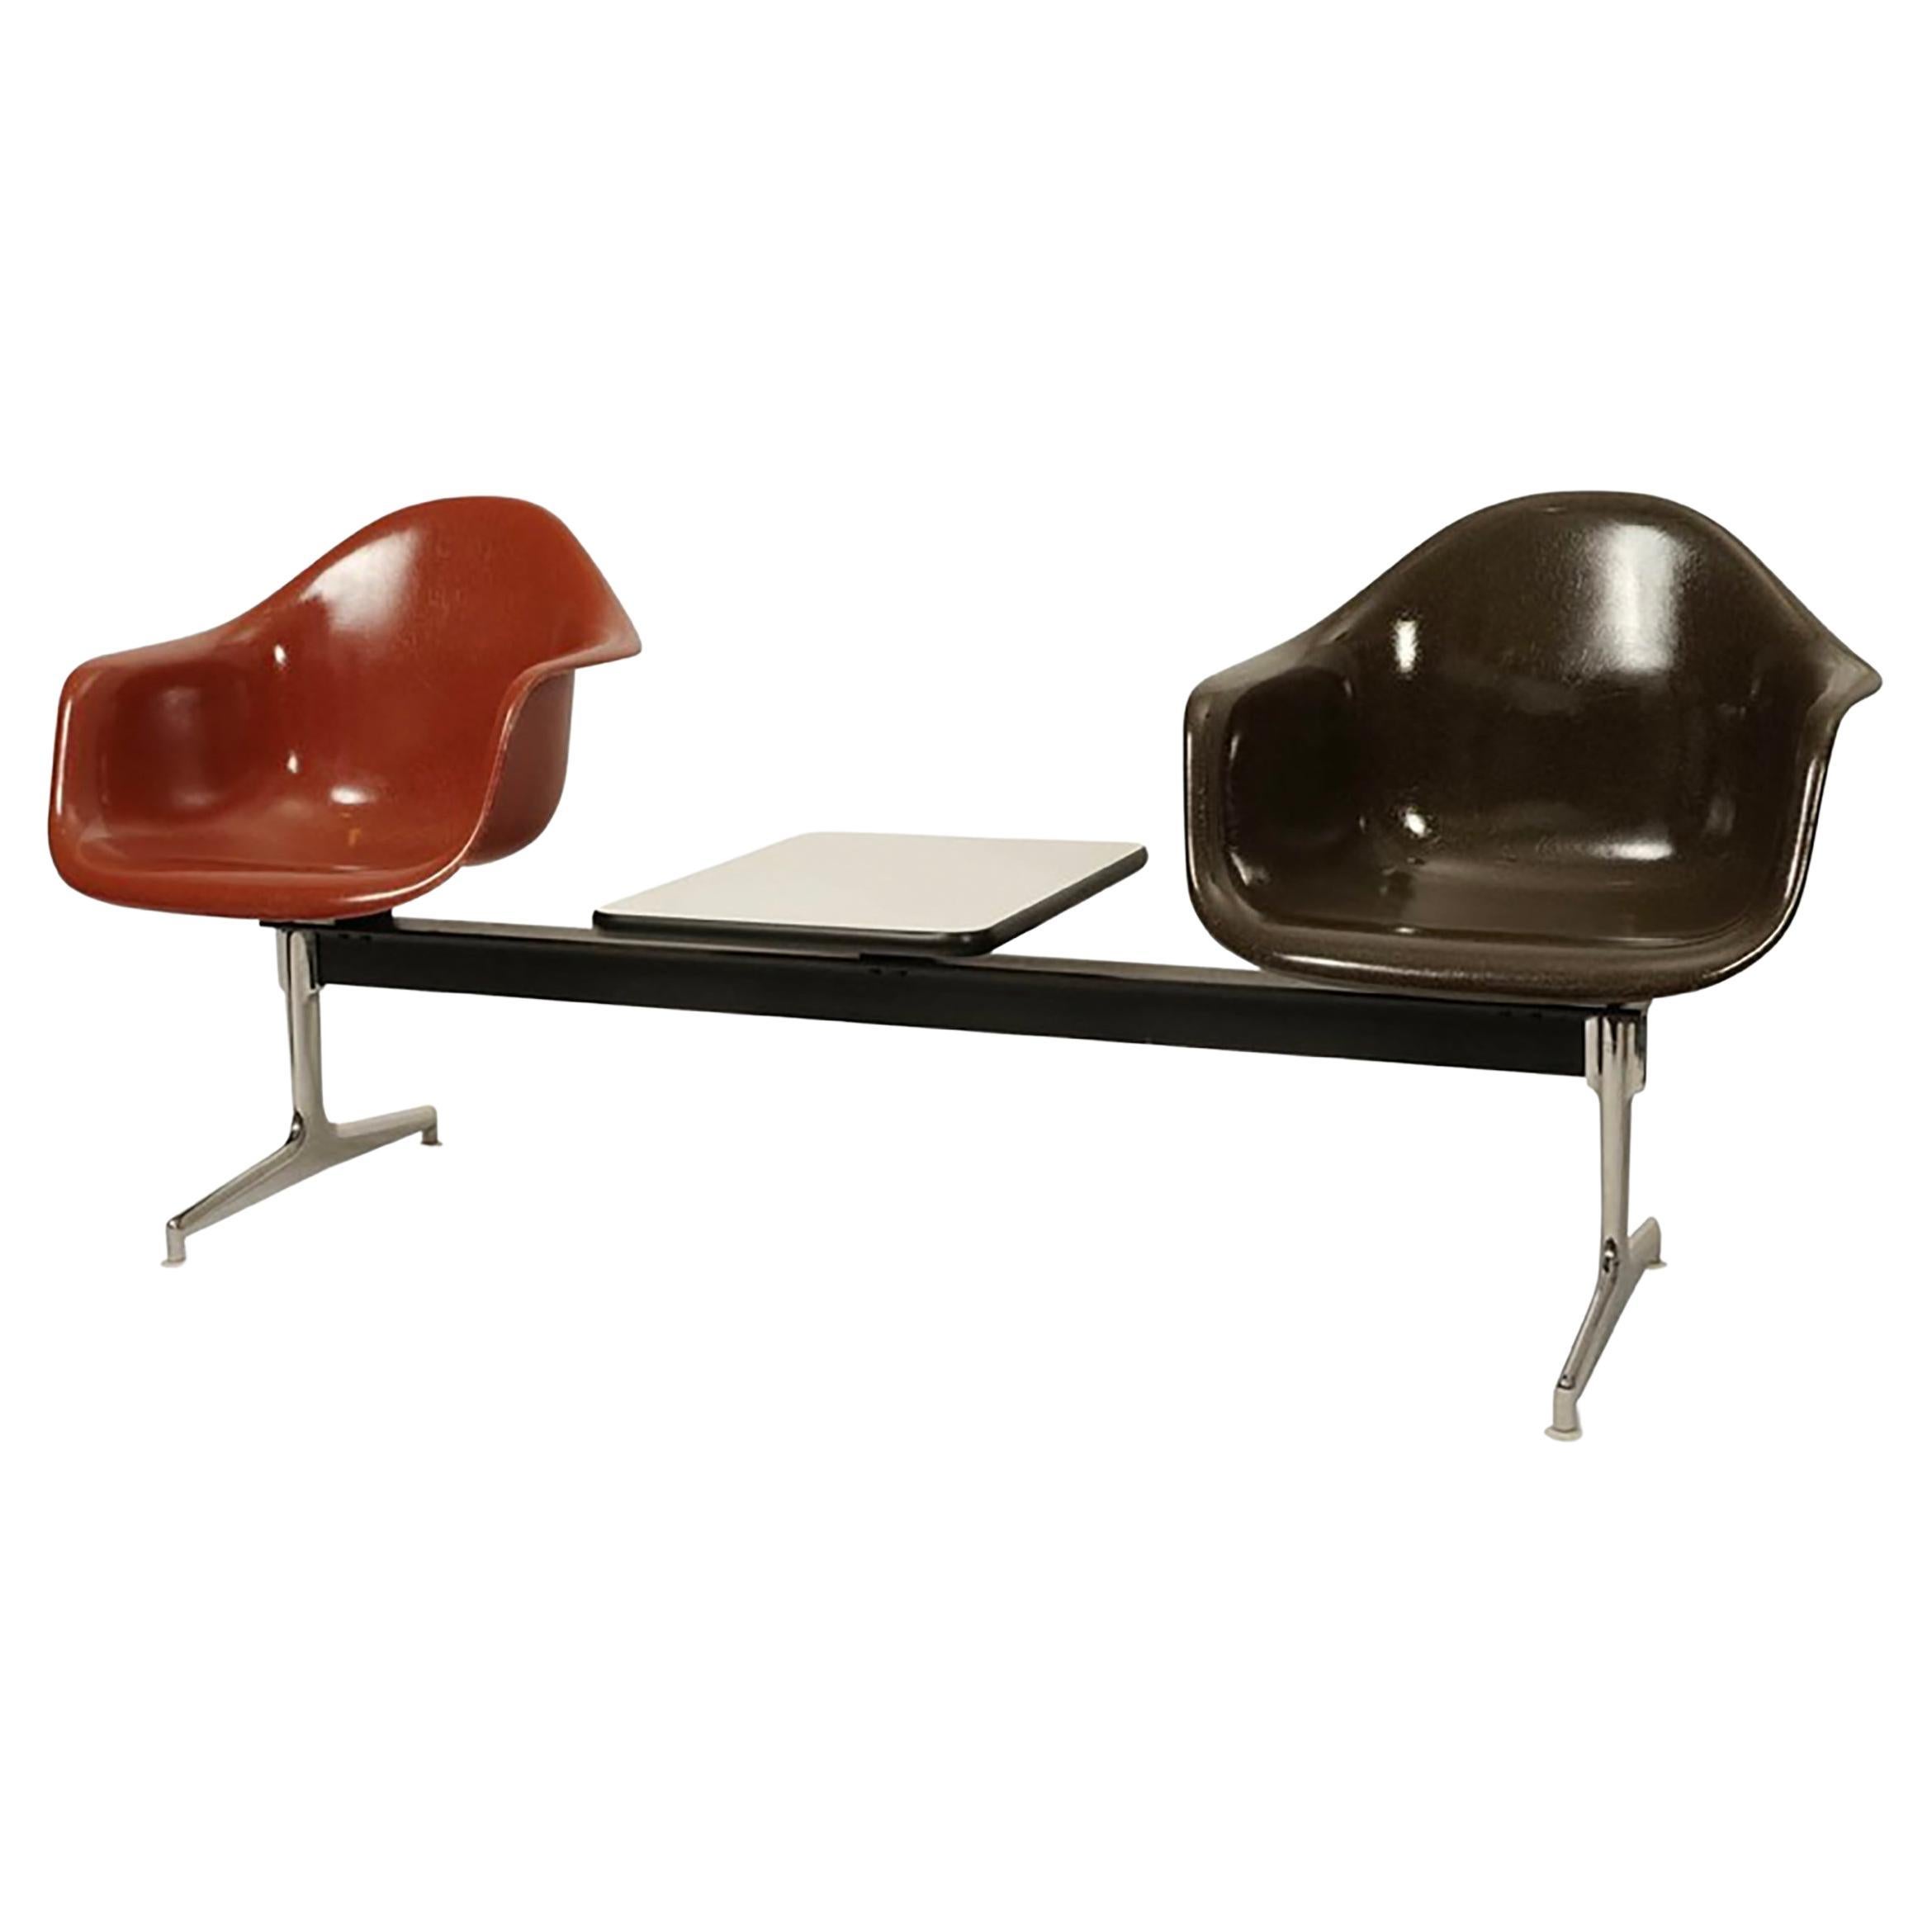 Ray & Charles Eames, Divers Tandem Benches for Shells